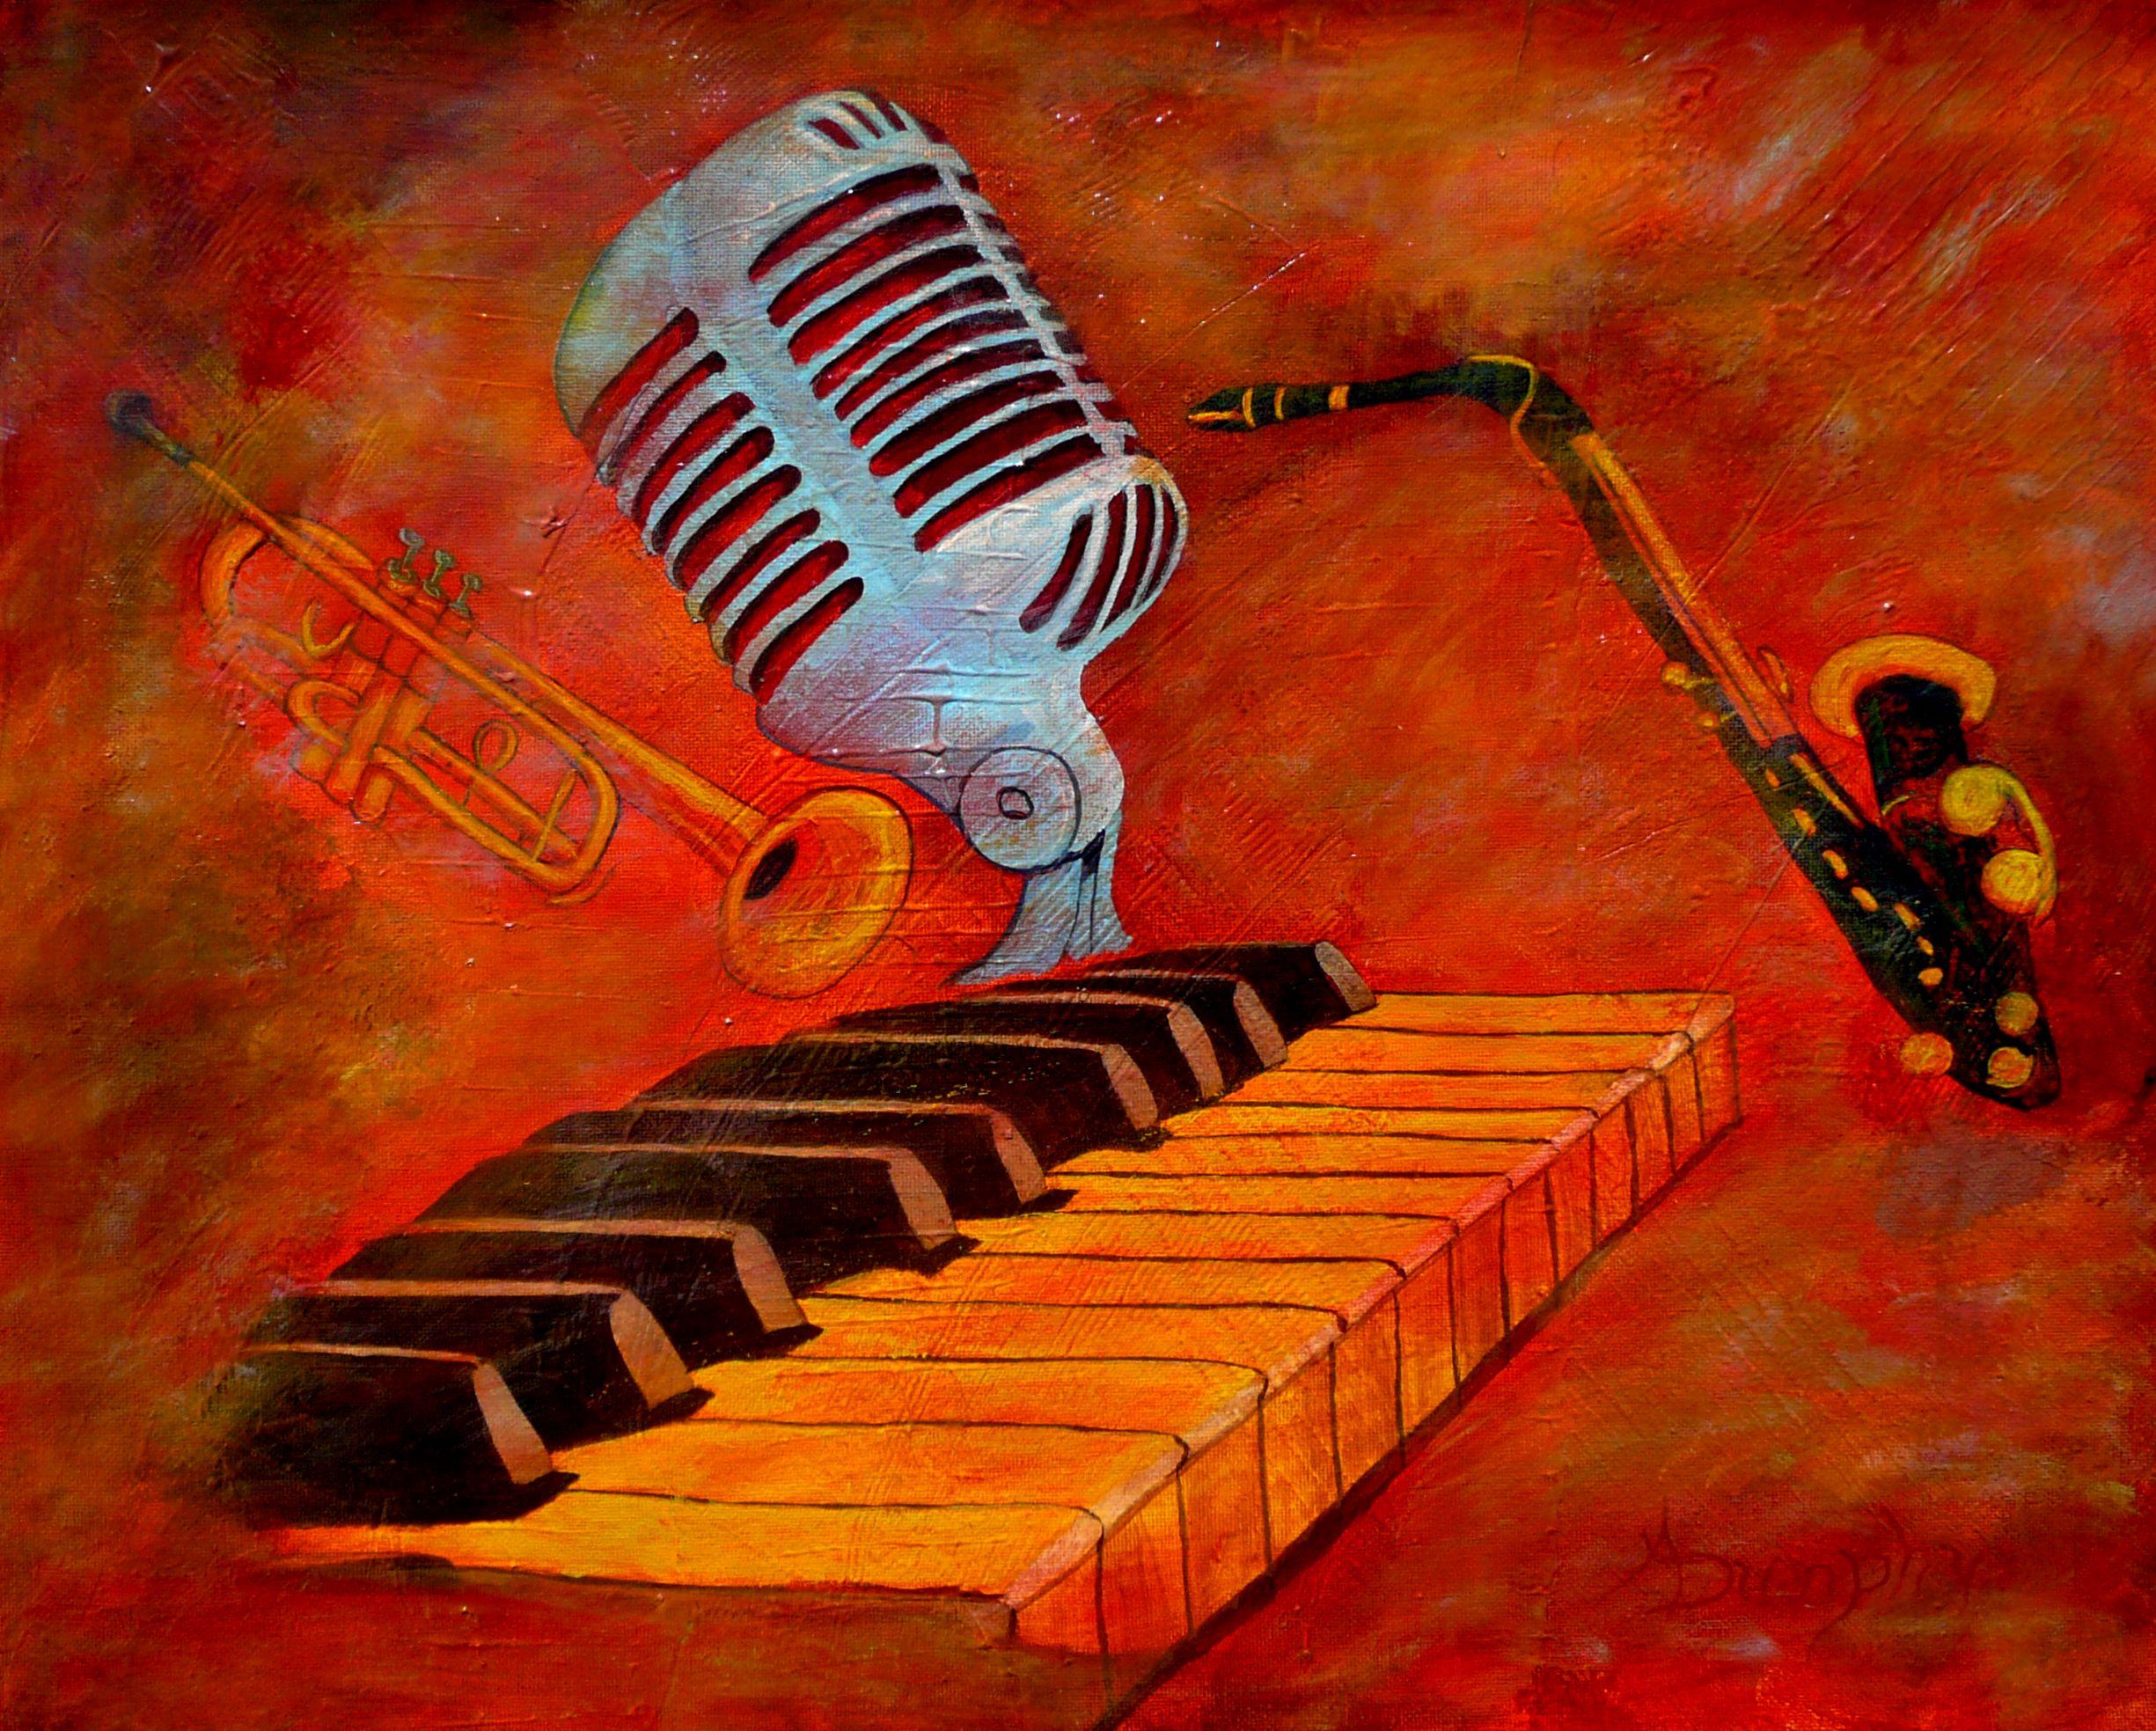 Imagine,if you will, you enter a dark and smoky club where you hears the plaintive wail of Jazz coming from the stage. The lights are low and the music pulls you inside.This musically themed painting has been created on canvas using only